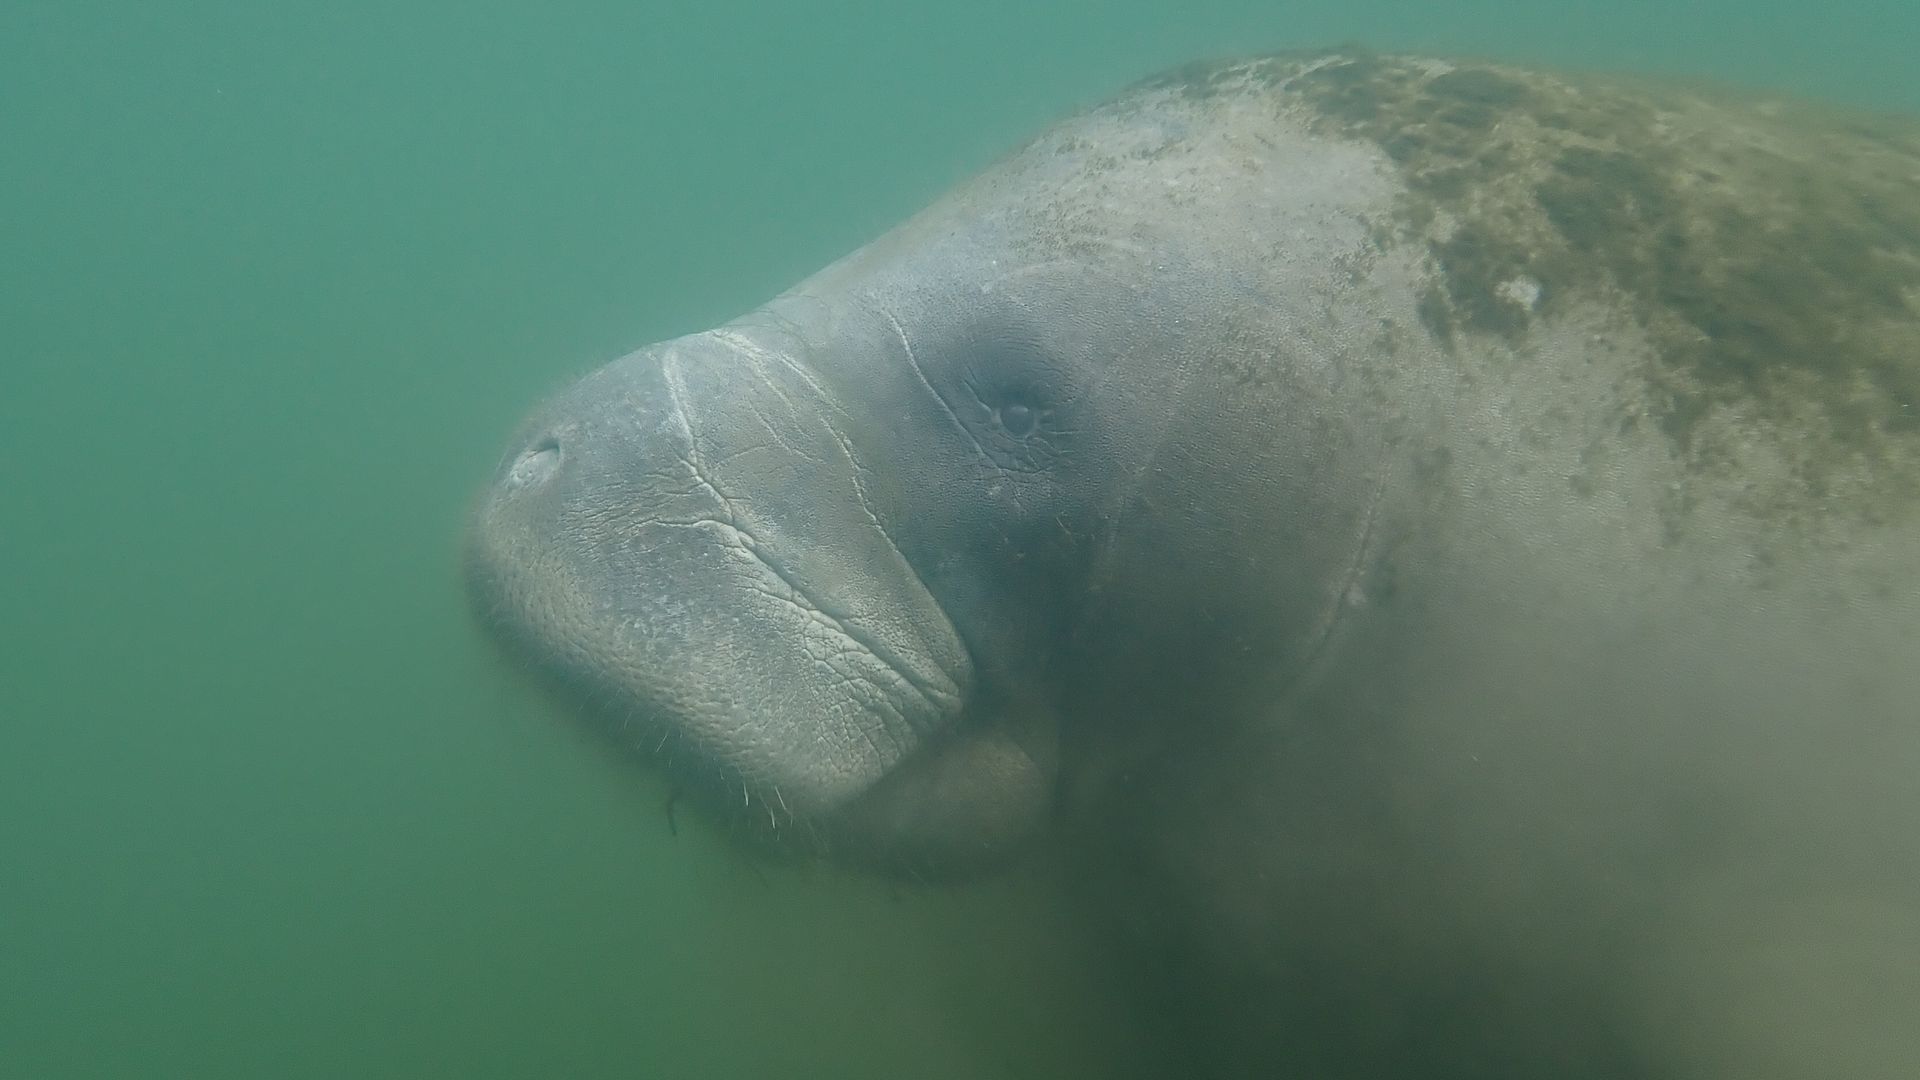 A close-up side view of a manatee underwater with algae on her back